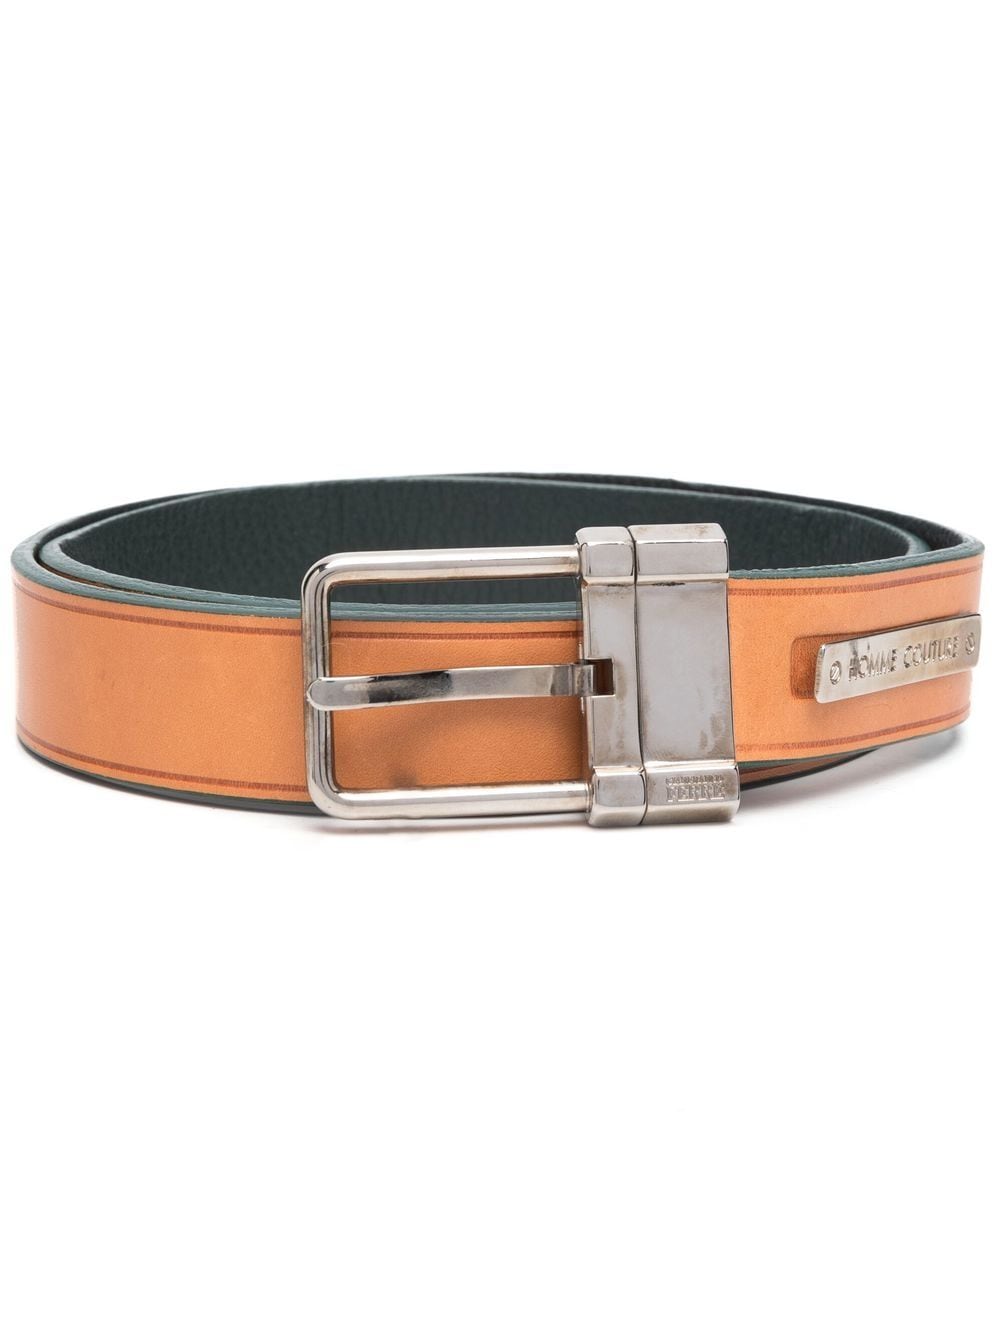 Gianfranco Ferré Pre-Owned 1990s buckled leather belt - Brown von Gianfranco Ferré Pre-Owned